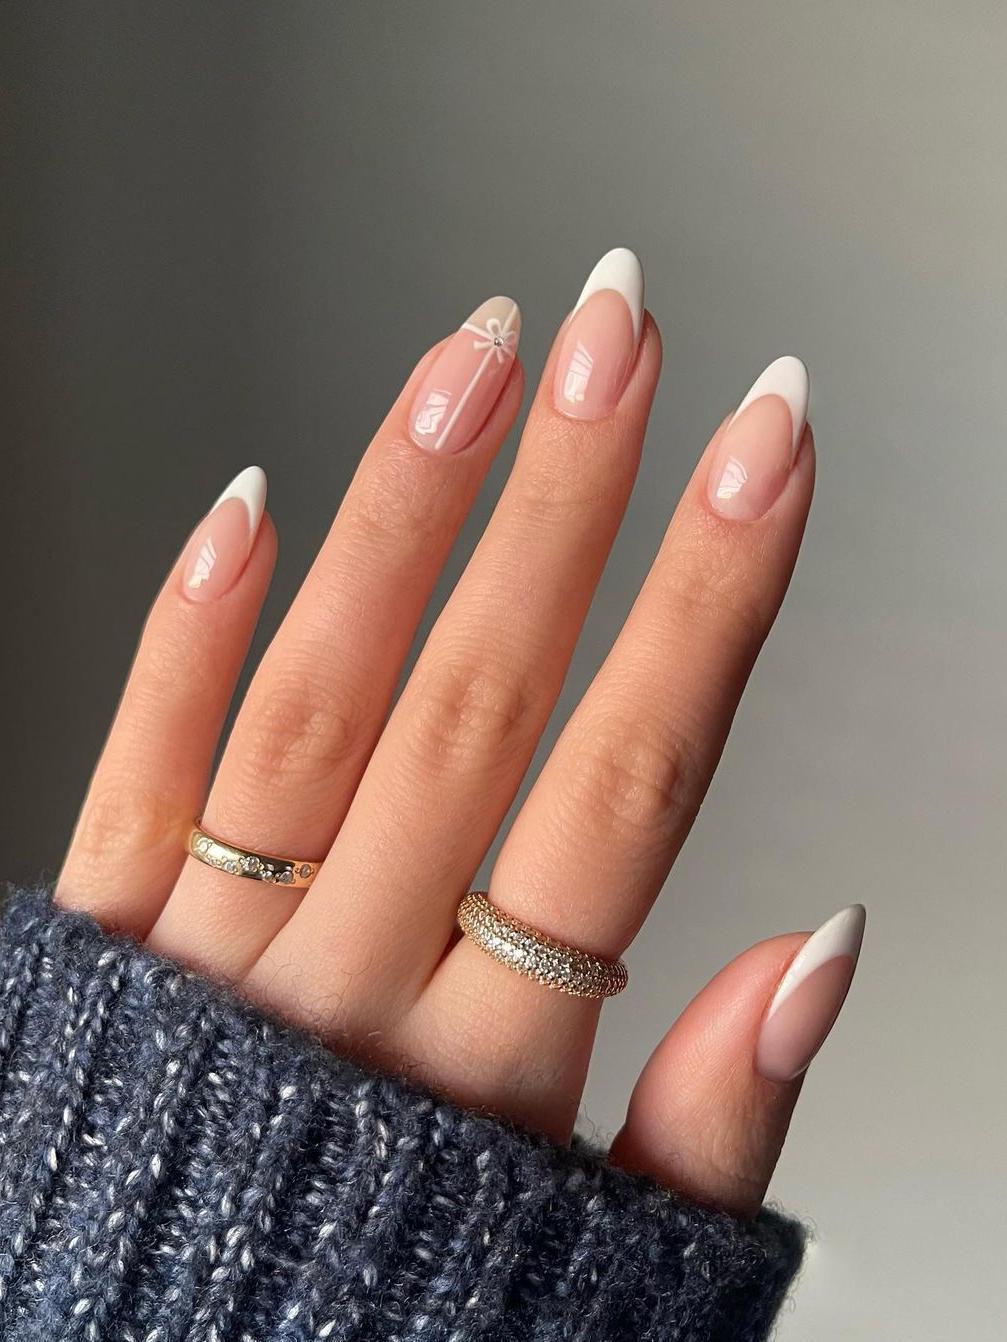 11 Classy Winter Nails That Are Timeless & Charming | BeautyStack